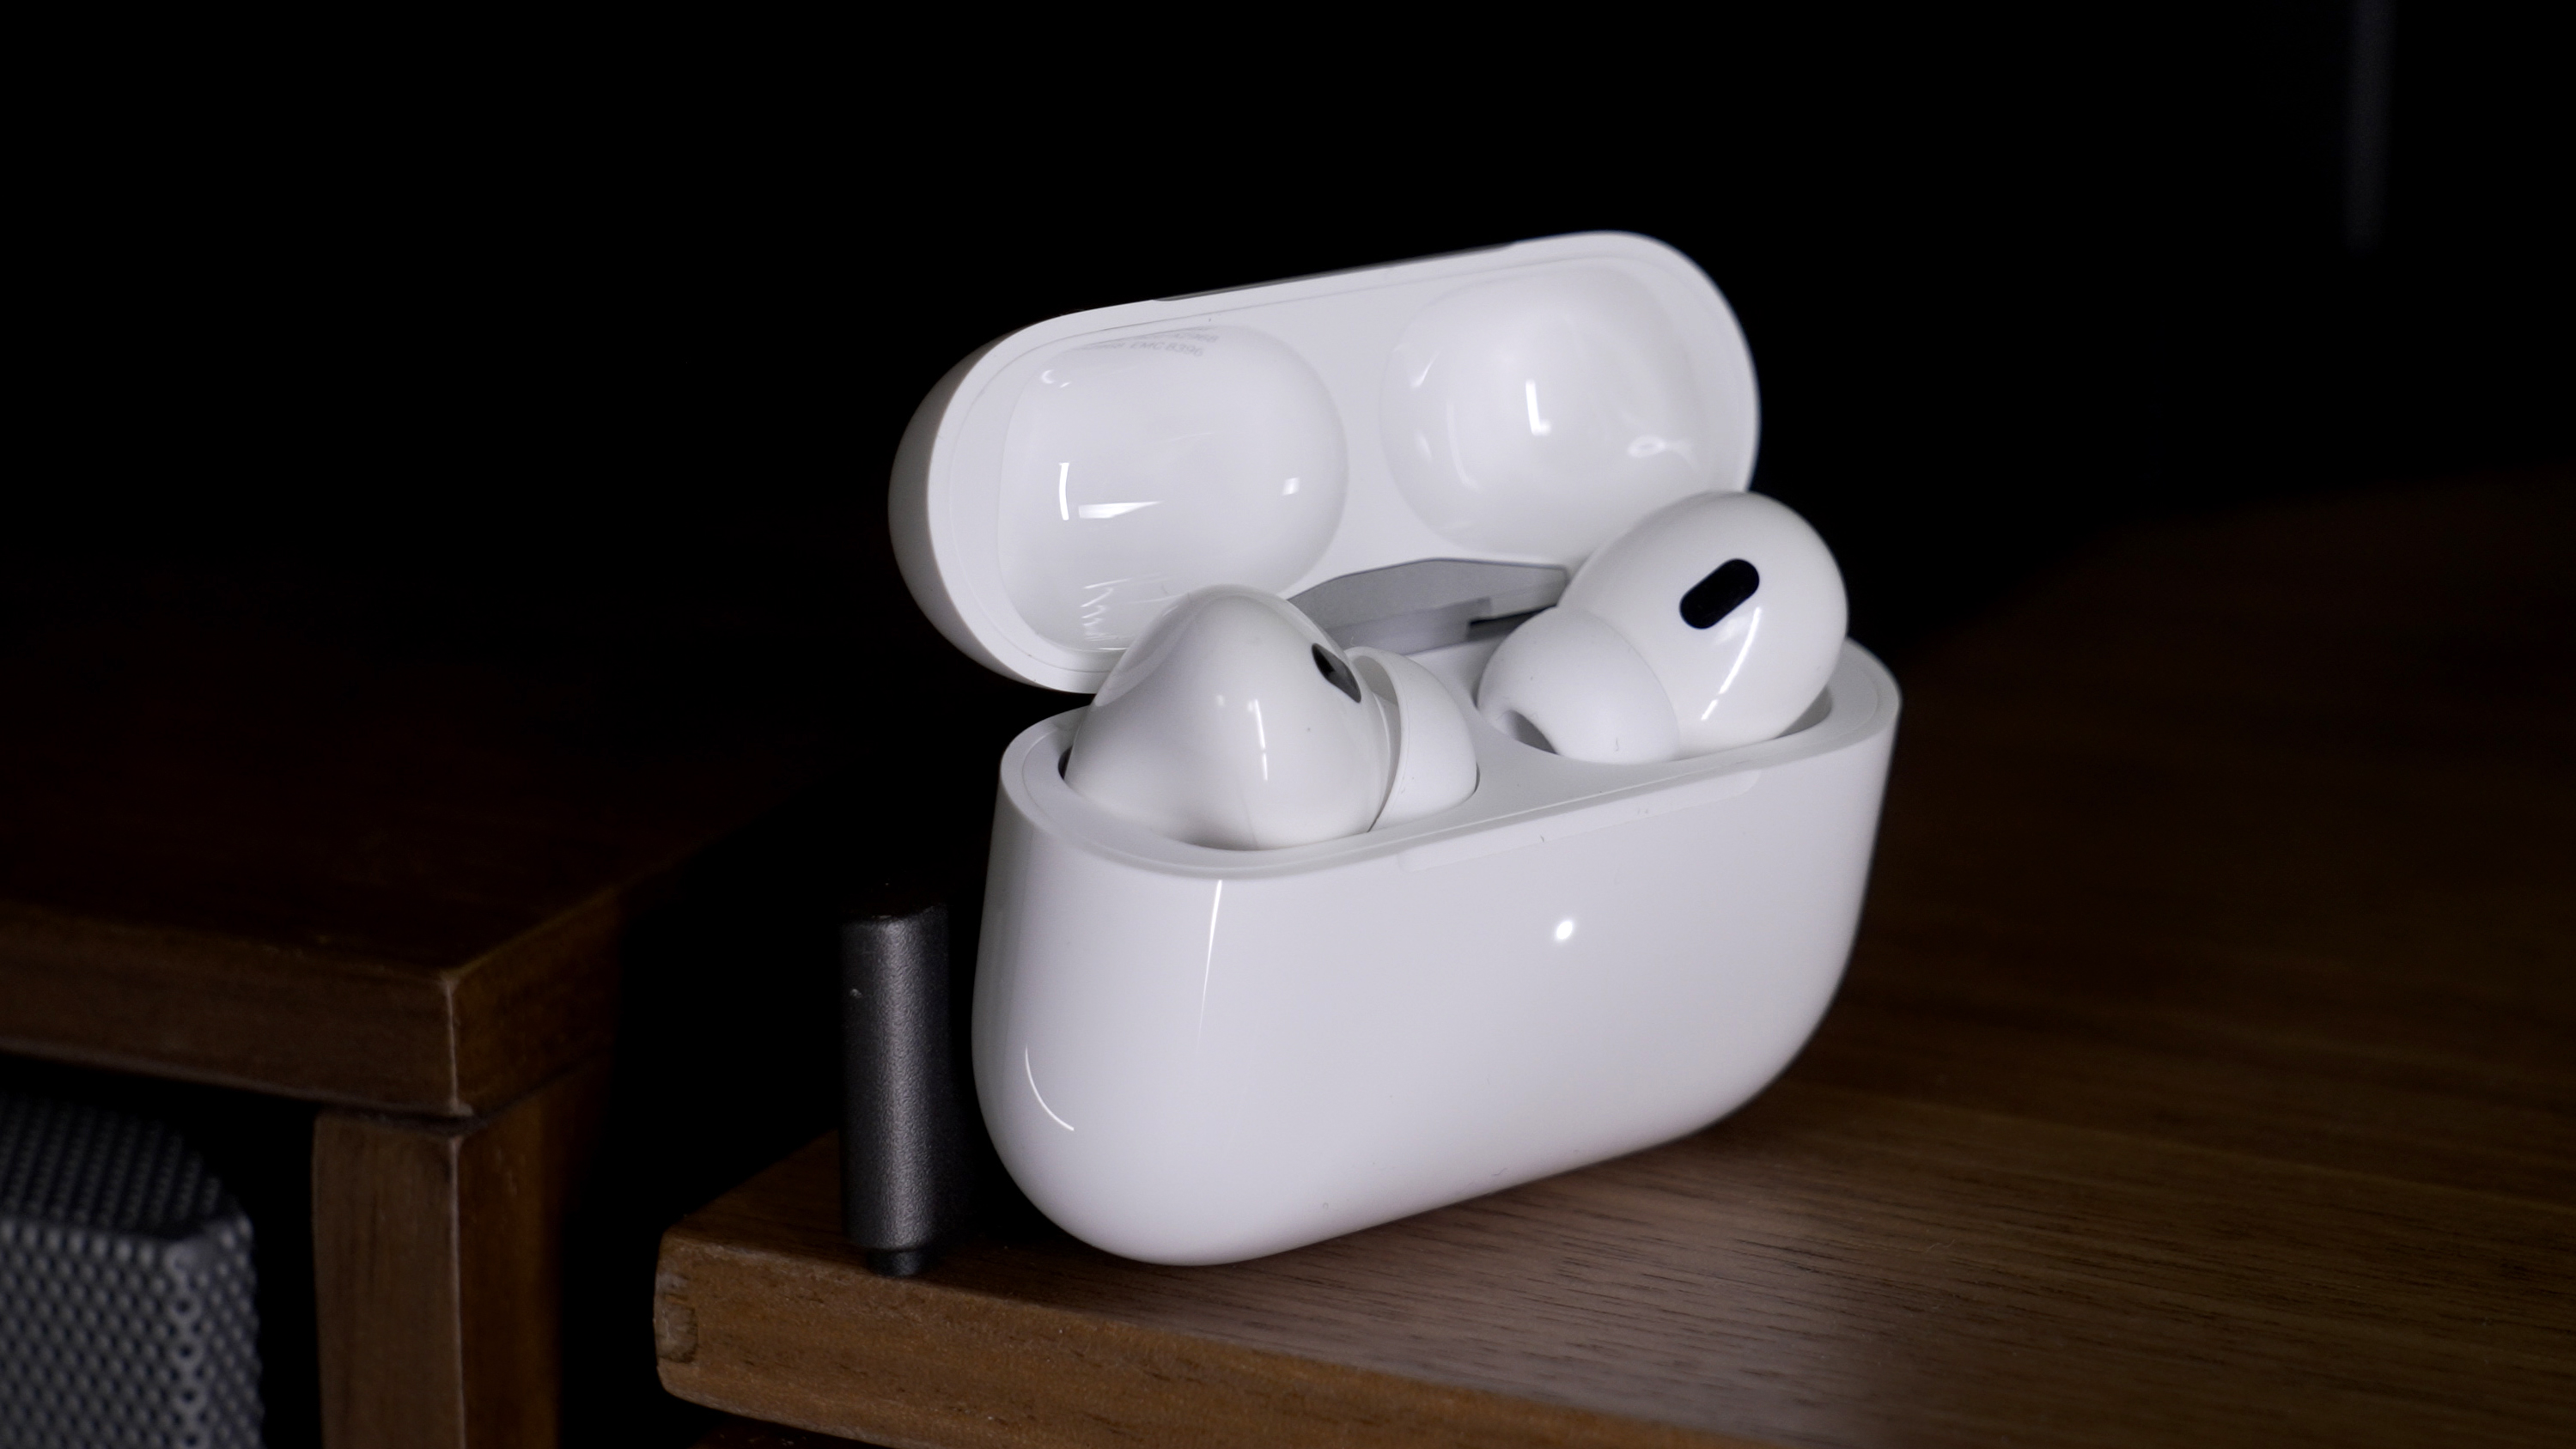 A new AirPods Pro case is coming because Apple loves USB-C now